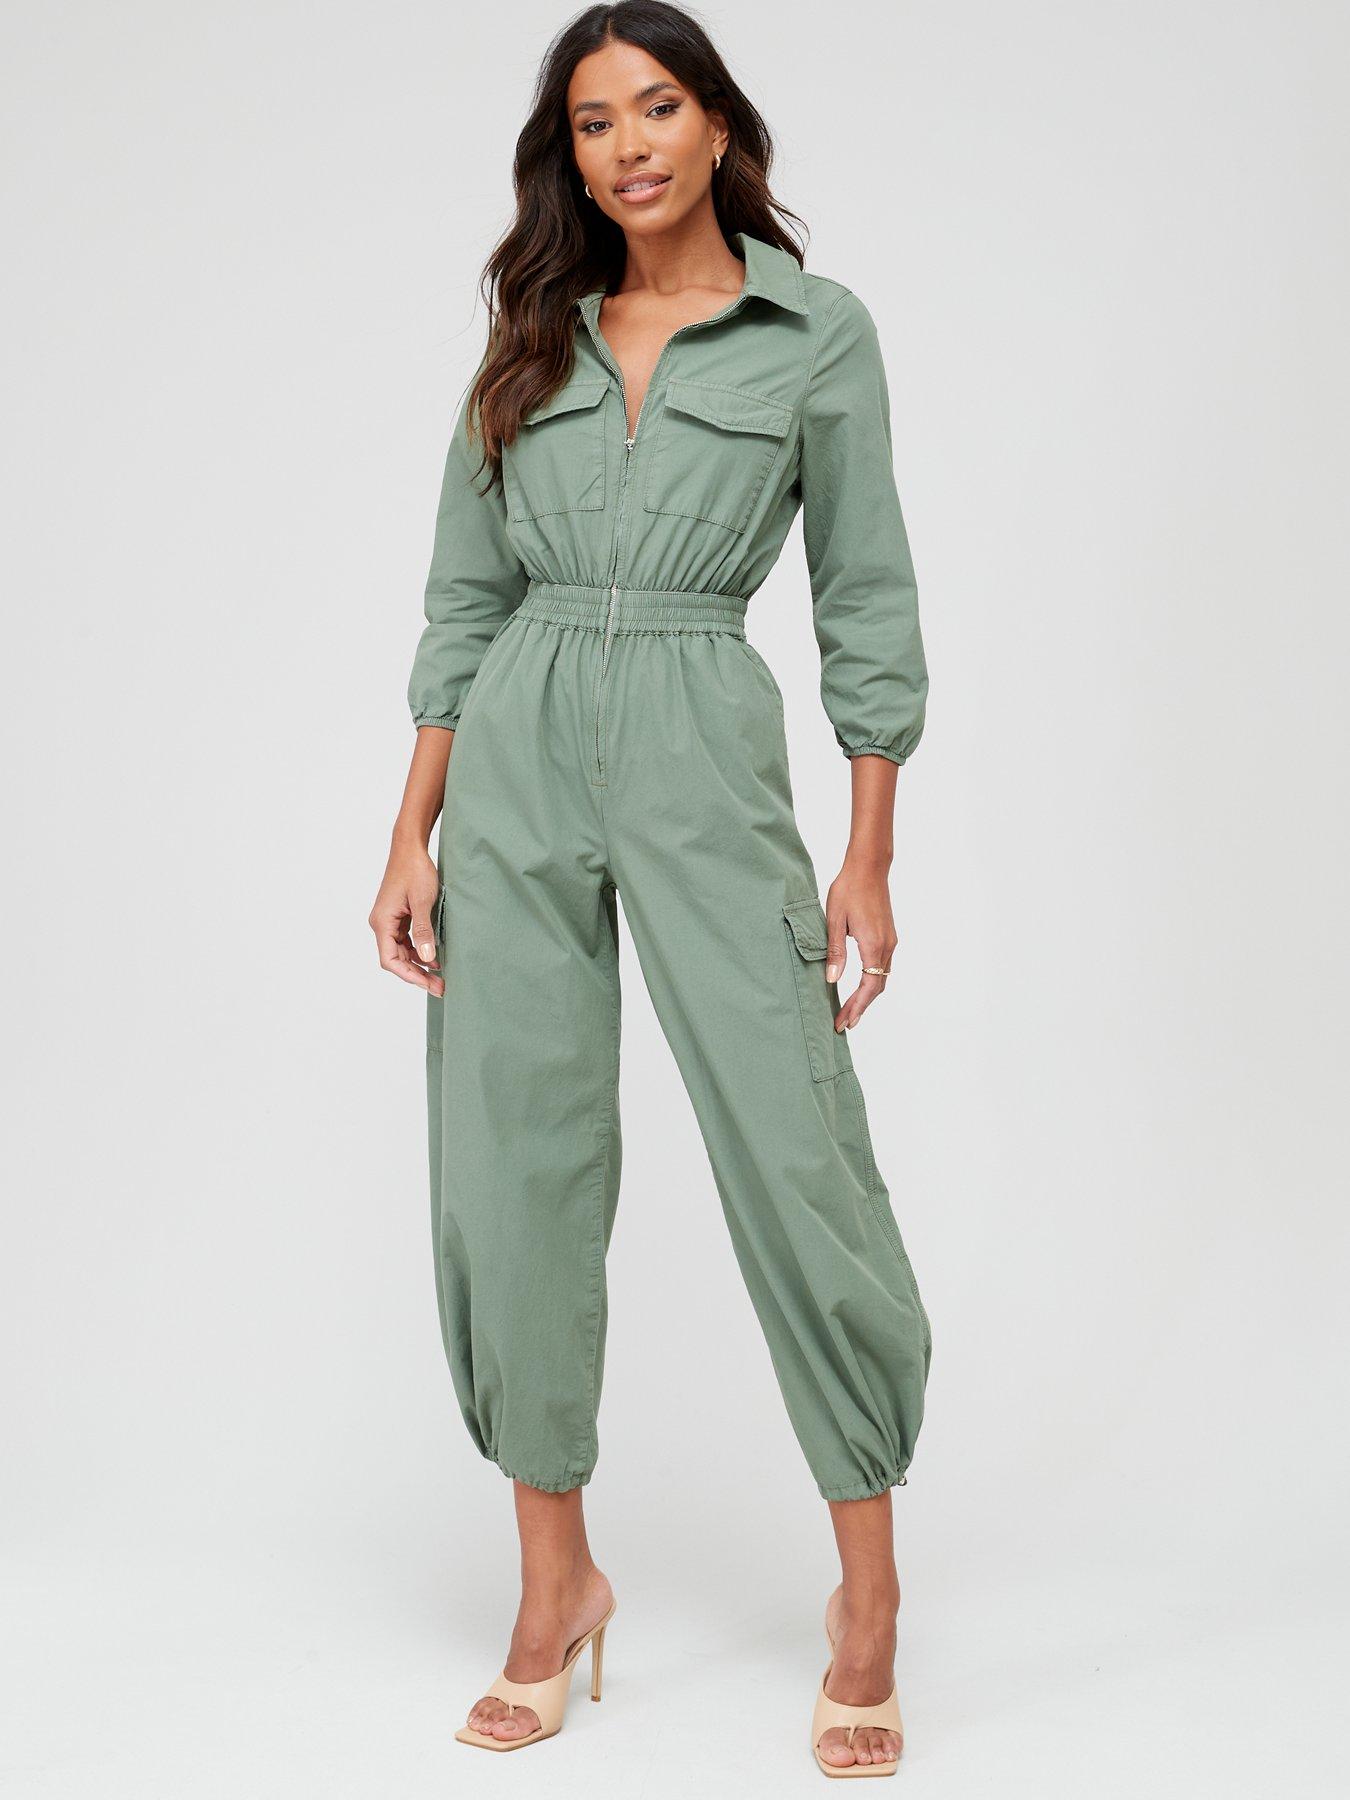 Women's Green Jumpsuits & Playsuits 